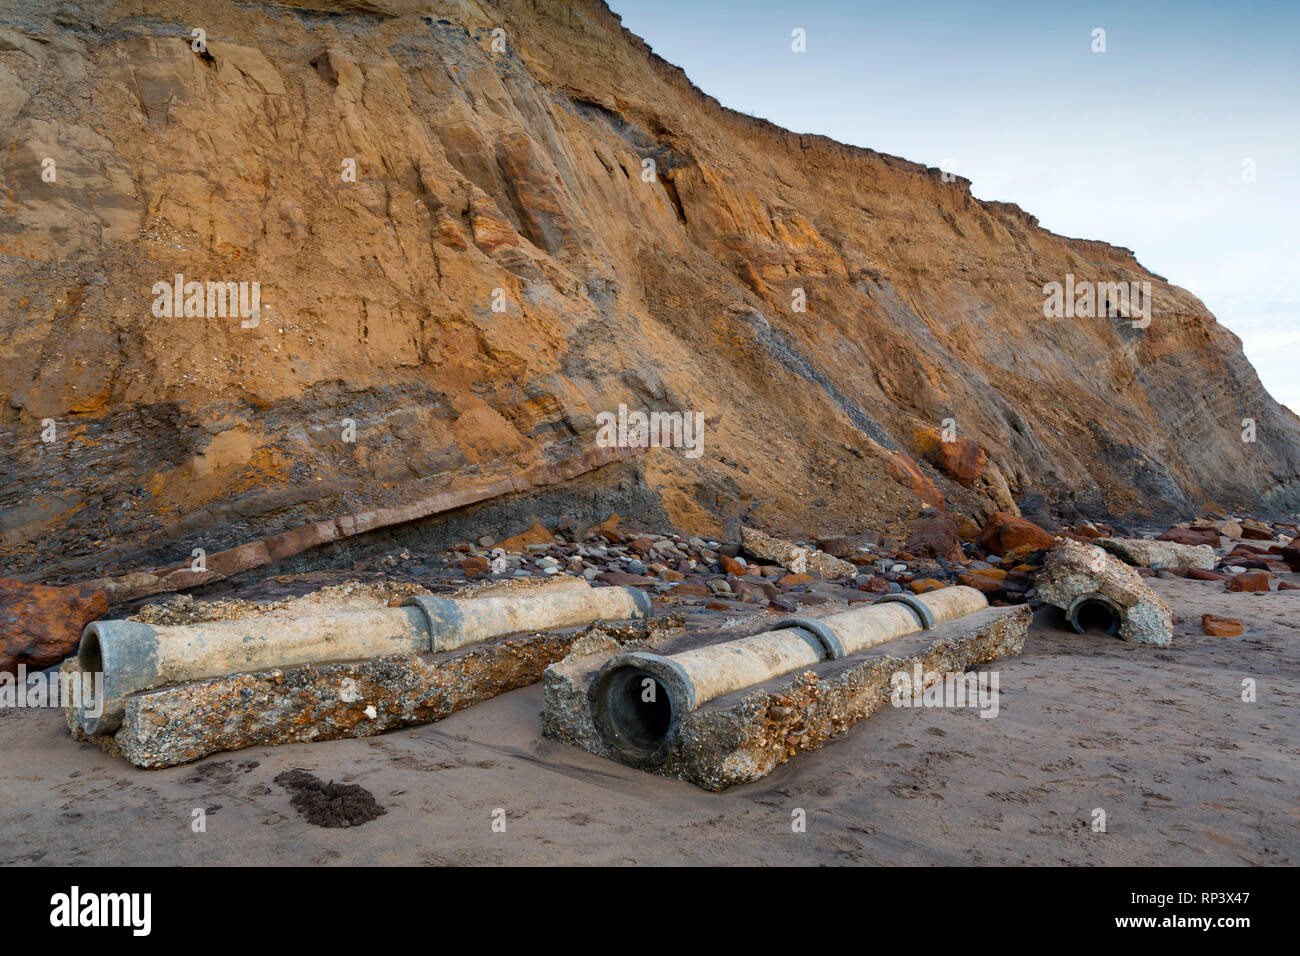 Coastal, Erosion, debris, on the, beach, pipes, cracks, cliffs, lower, greensand, wealden, beds, geology, Compton, Bay, Isle of Wight, UK, Stock Photo